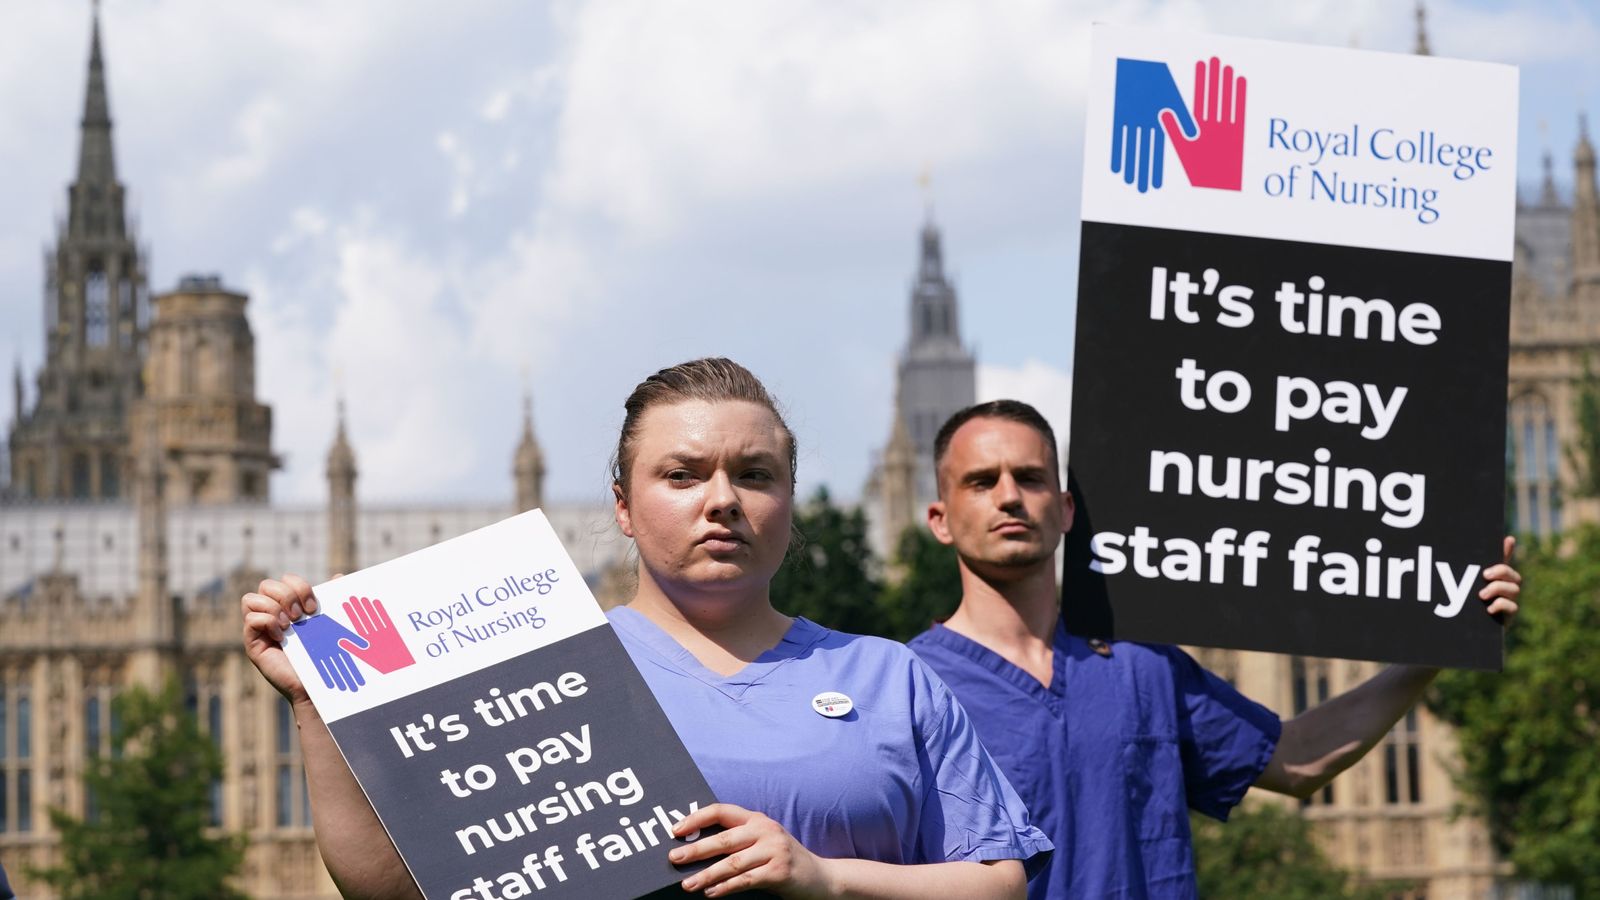 NHS nurses' strike dates announced: Staff to walk out for two days in December in dispute over pay